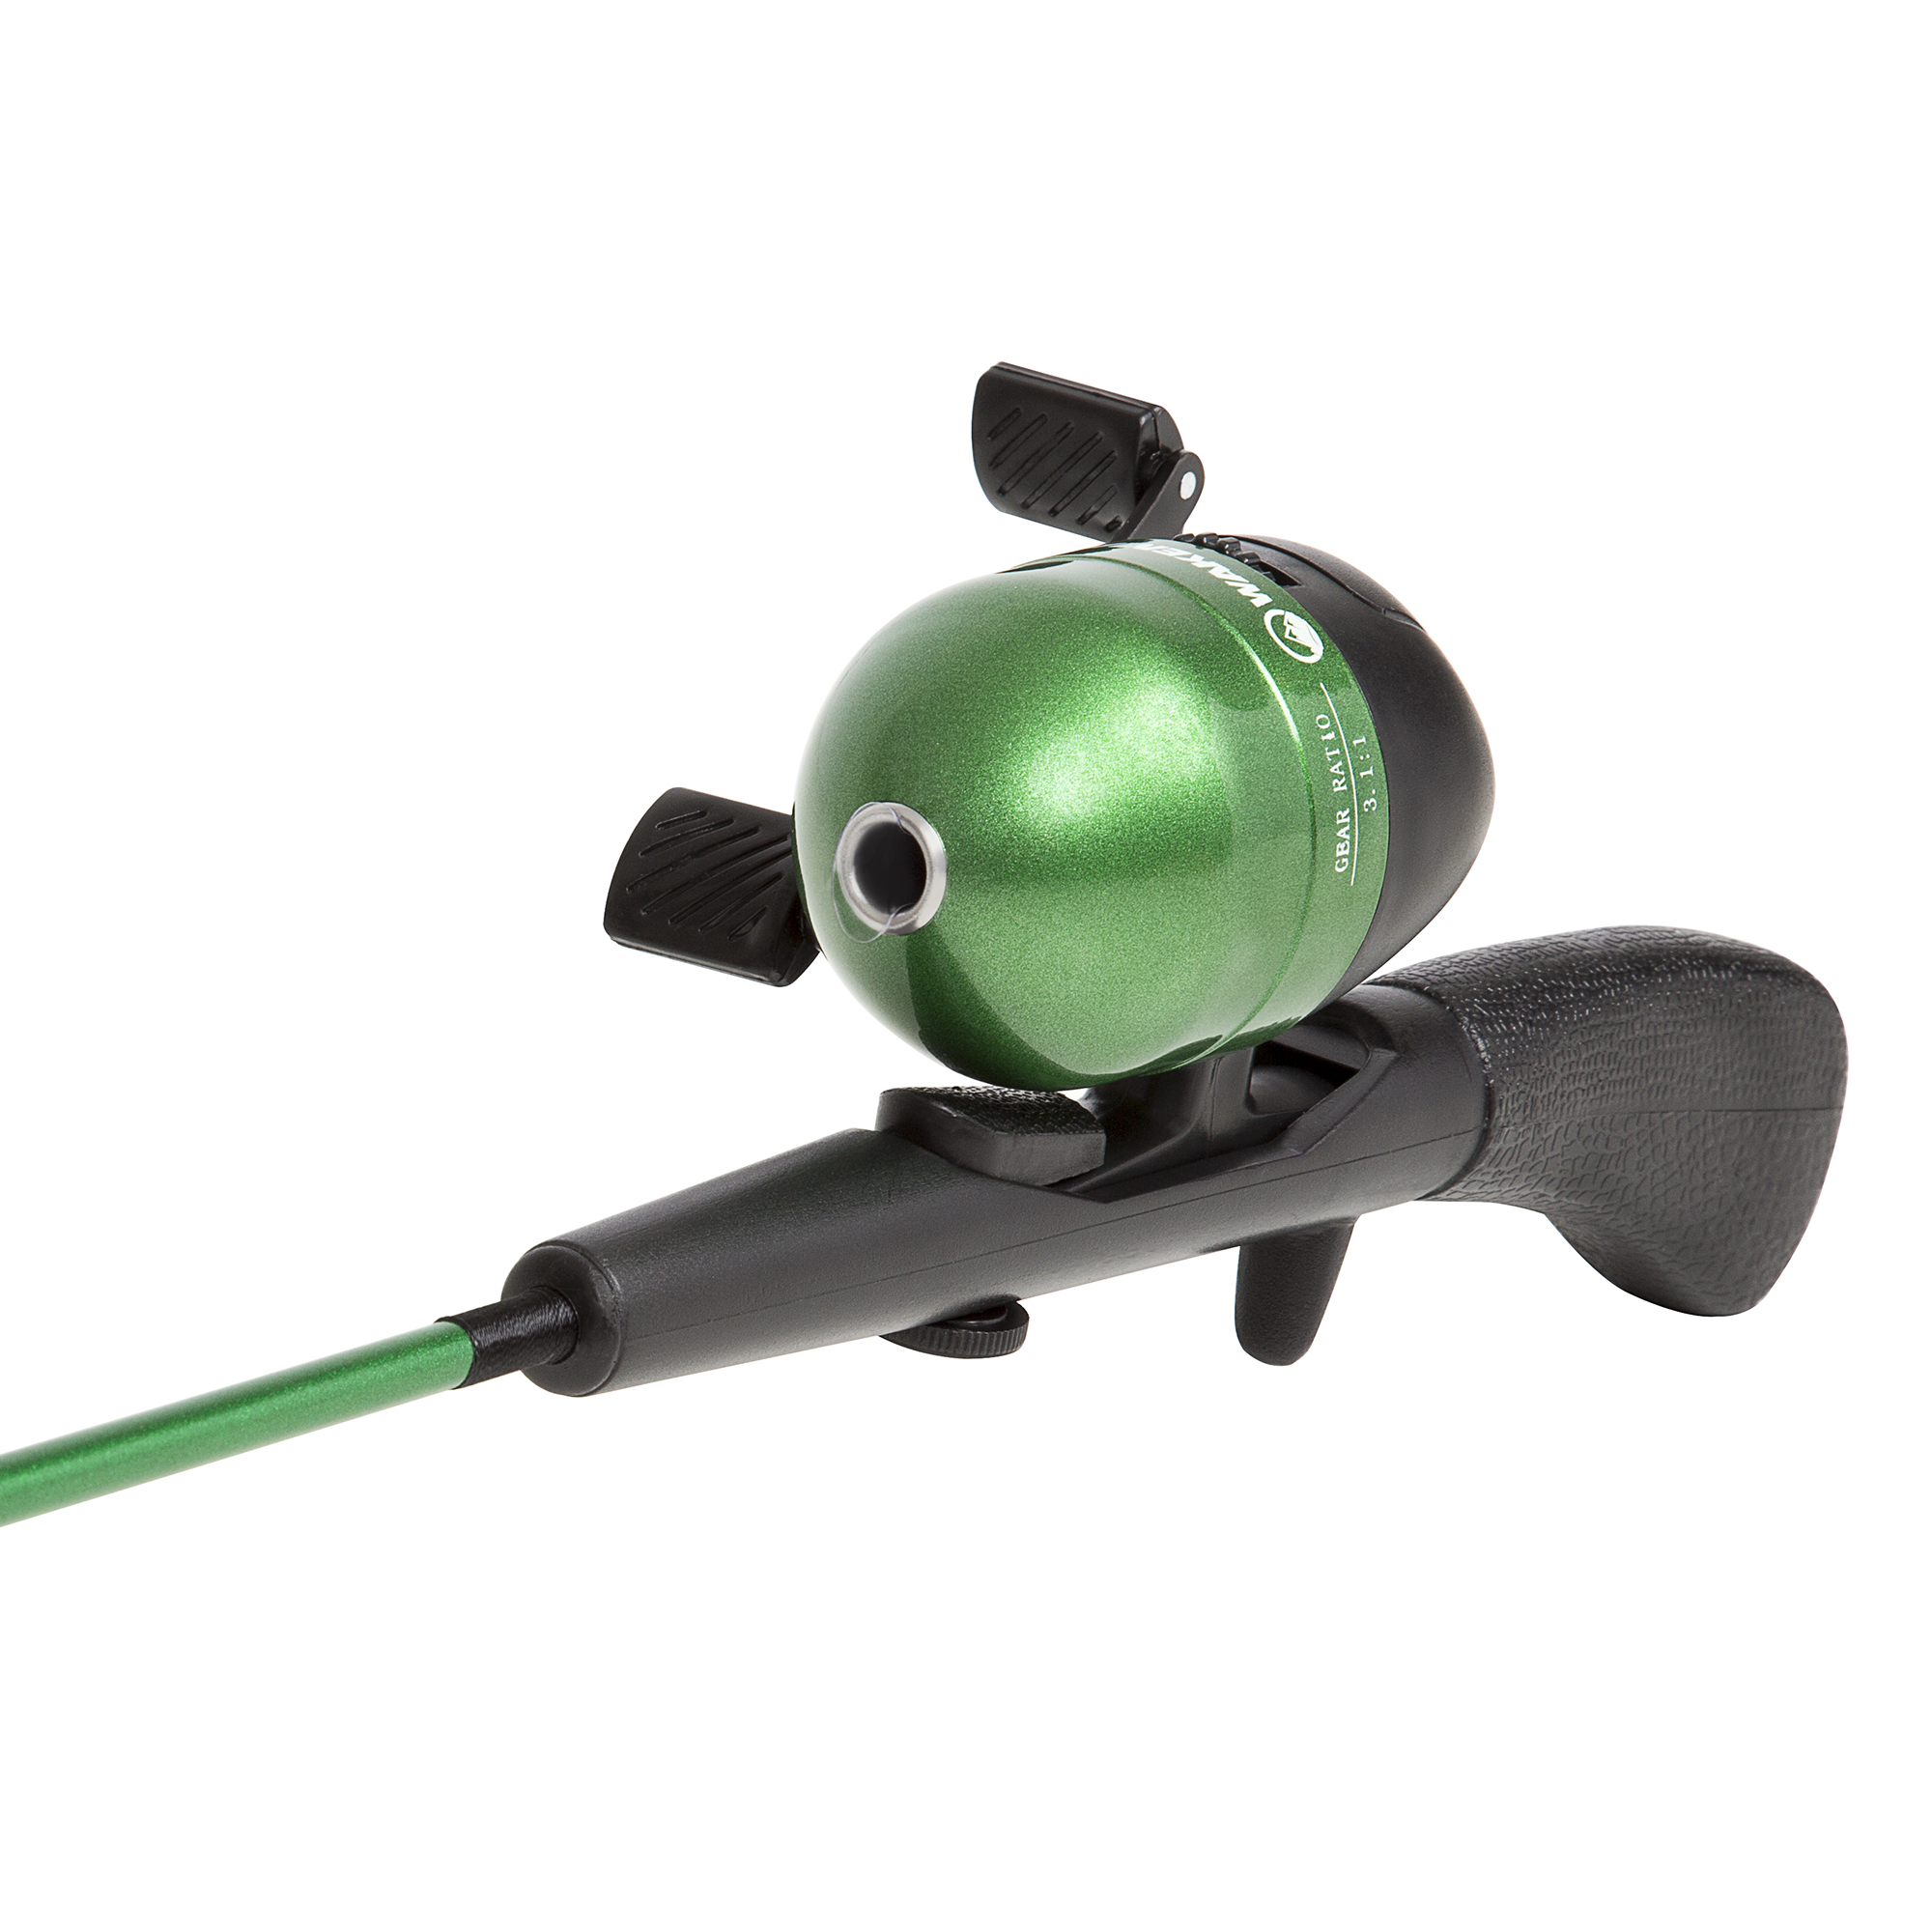 Wakeman Spawn Series Kids Spin Cast Combo Fishing Pole and Tackle Set - image 3 of 5